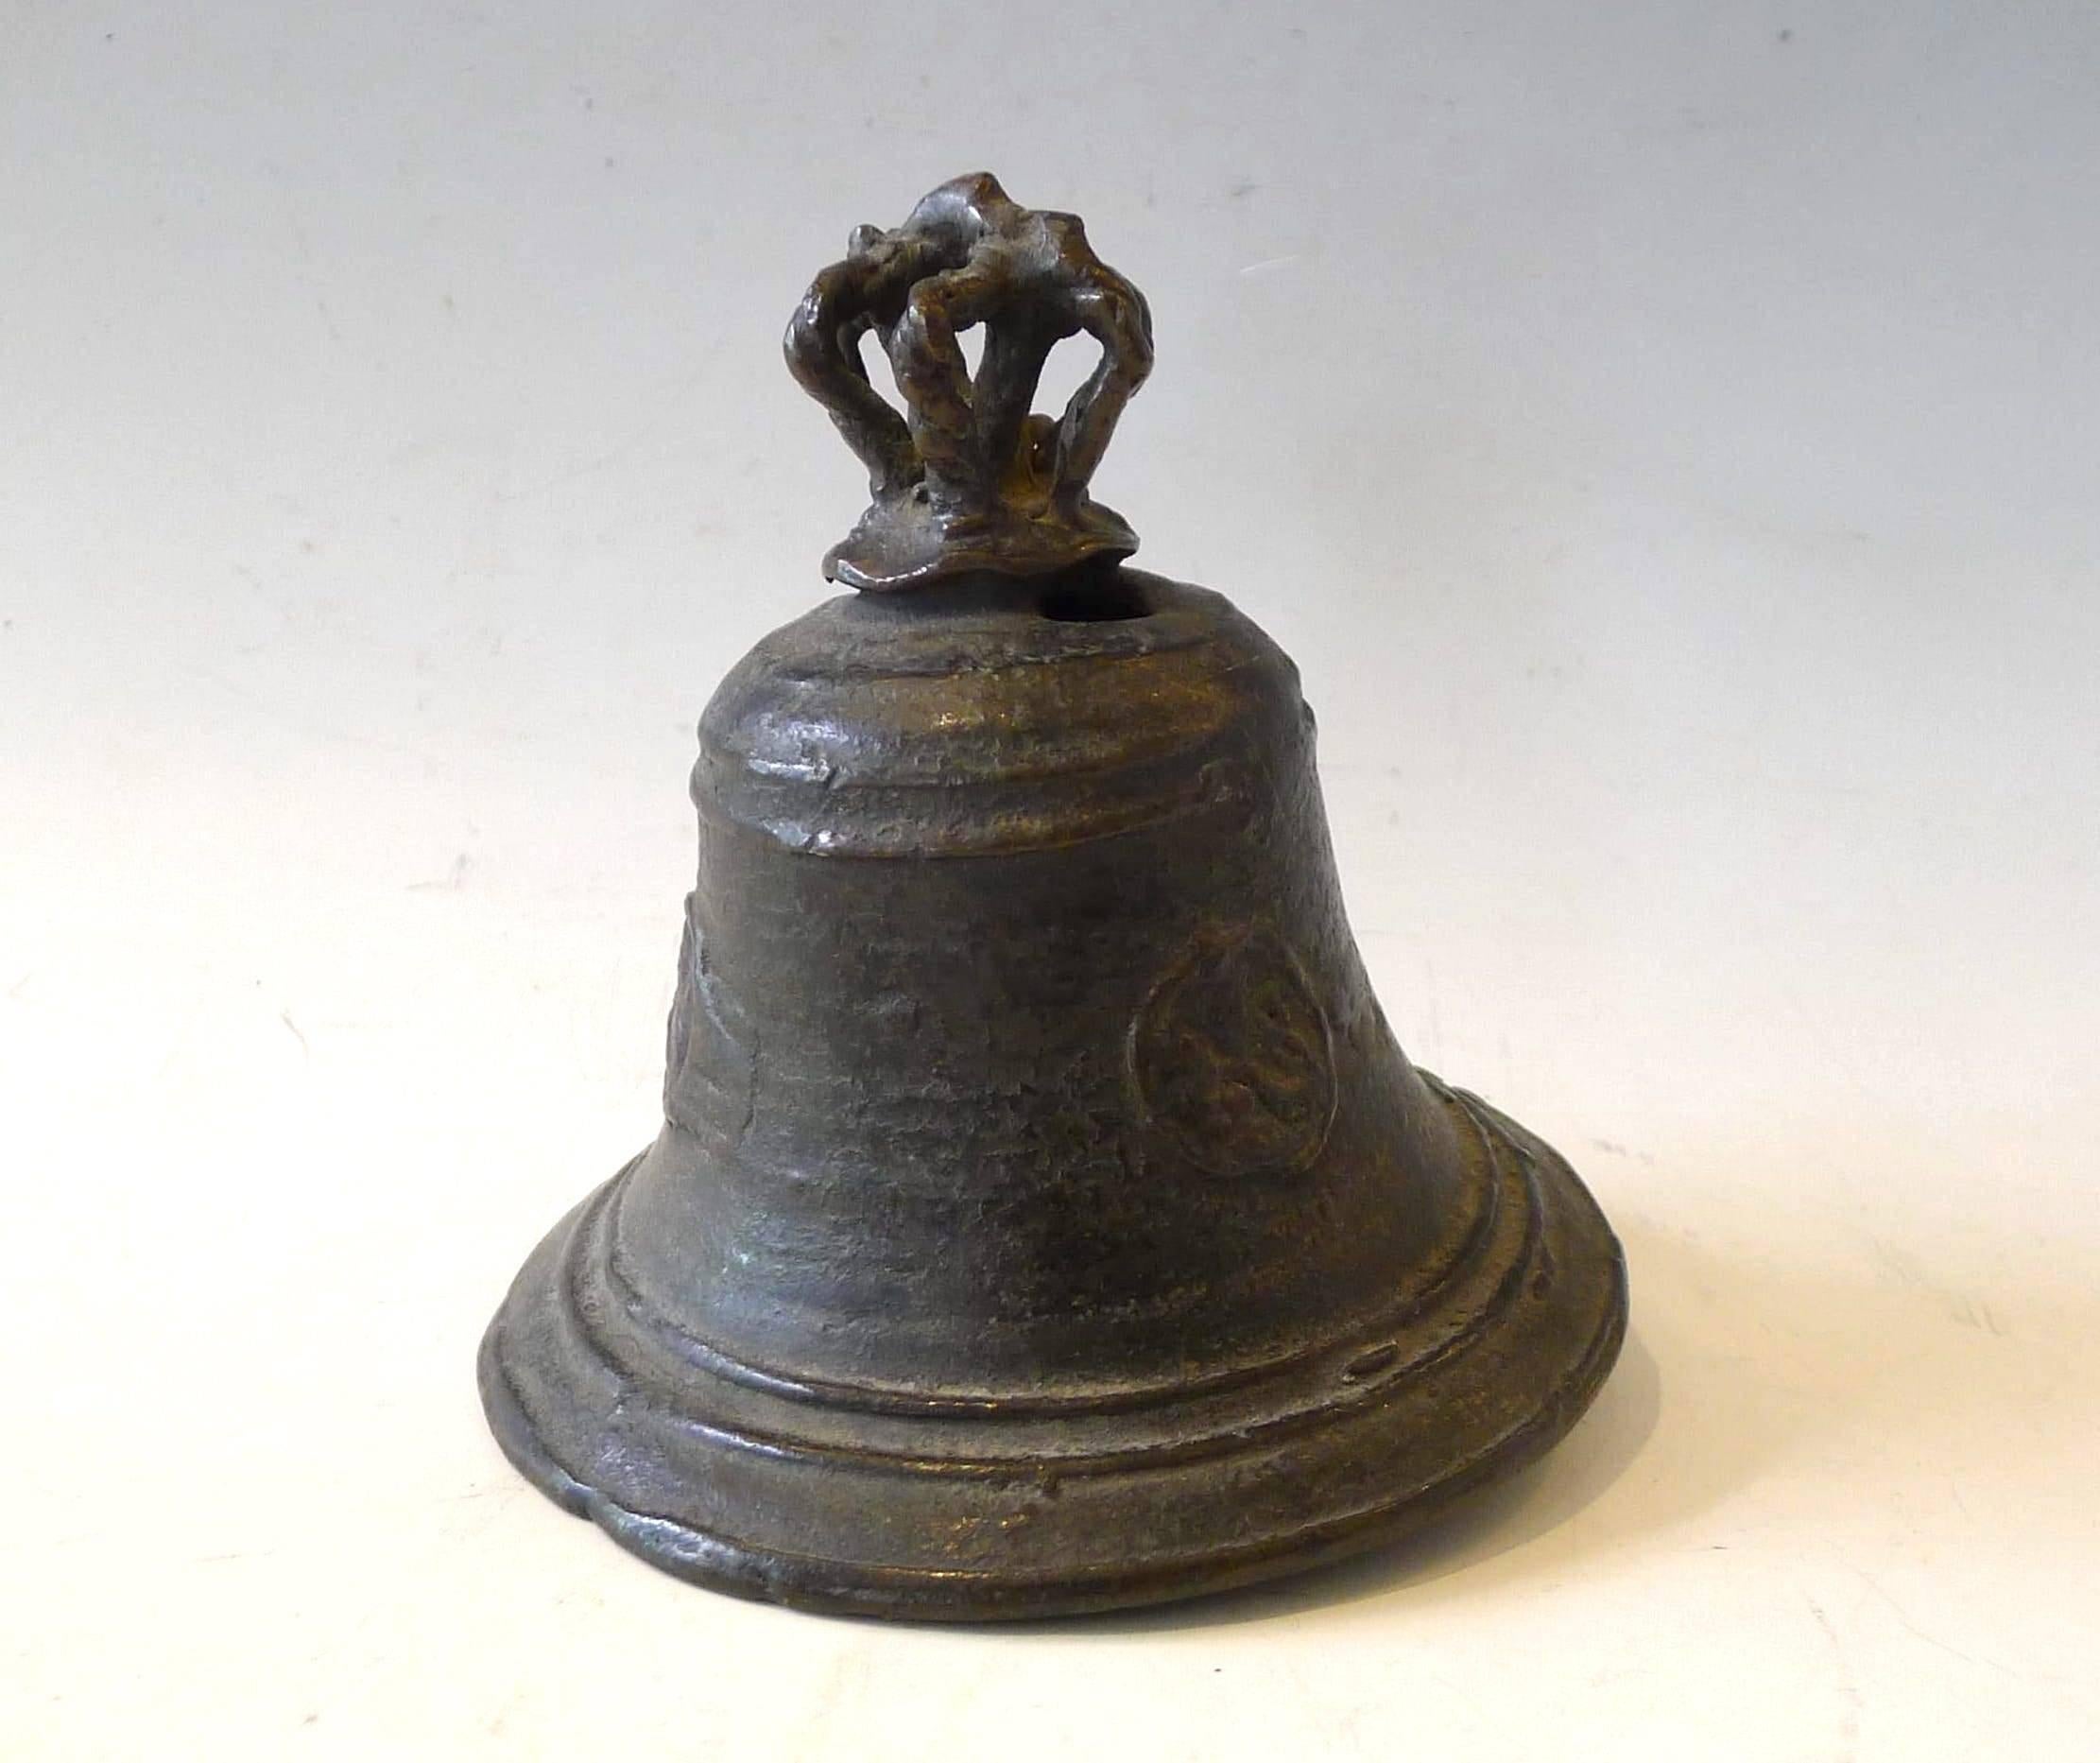 Cute bronze bell, 16th century, from Florence, Italy.